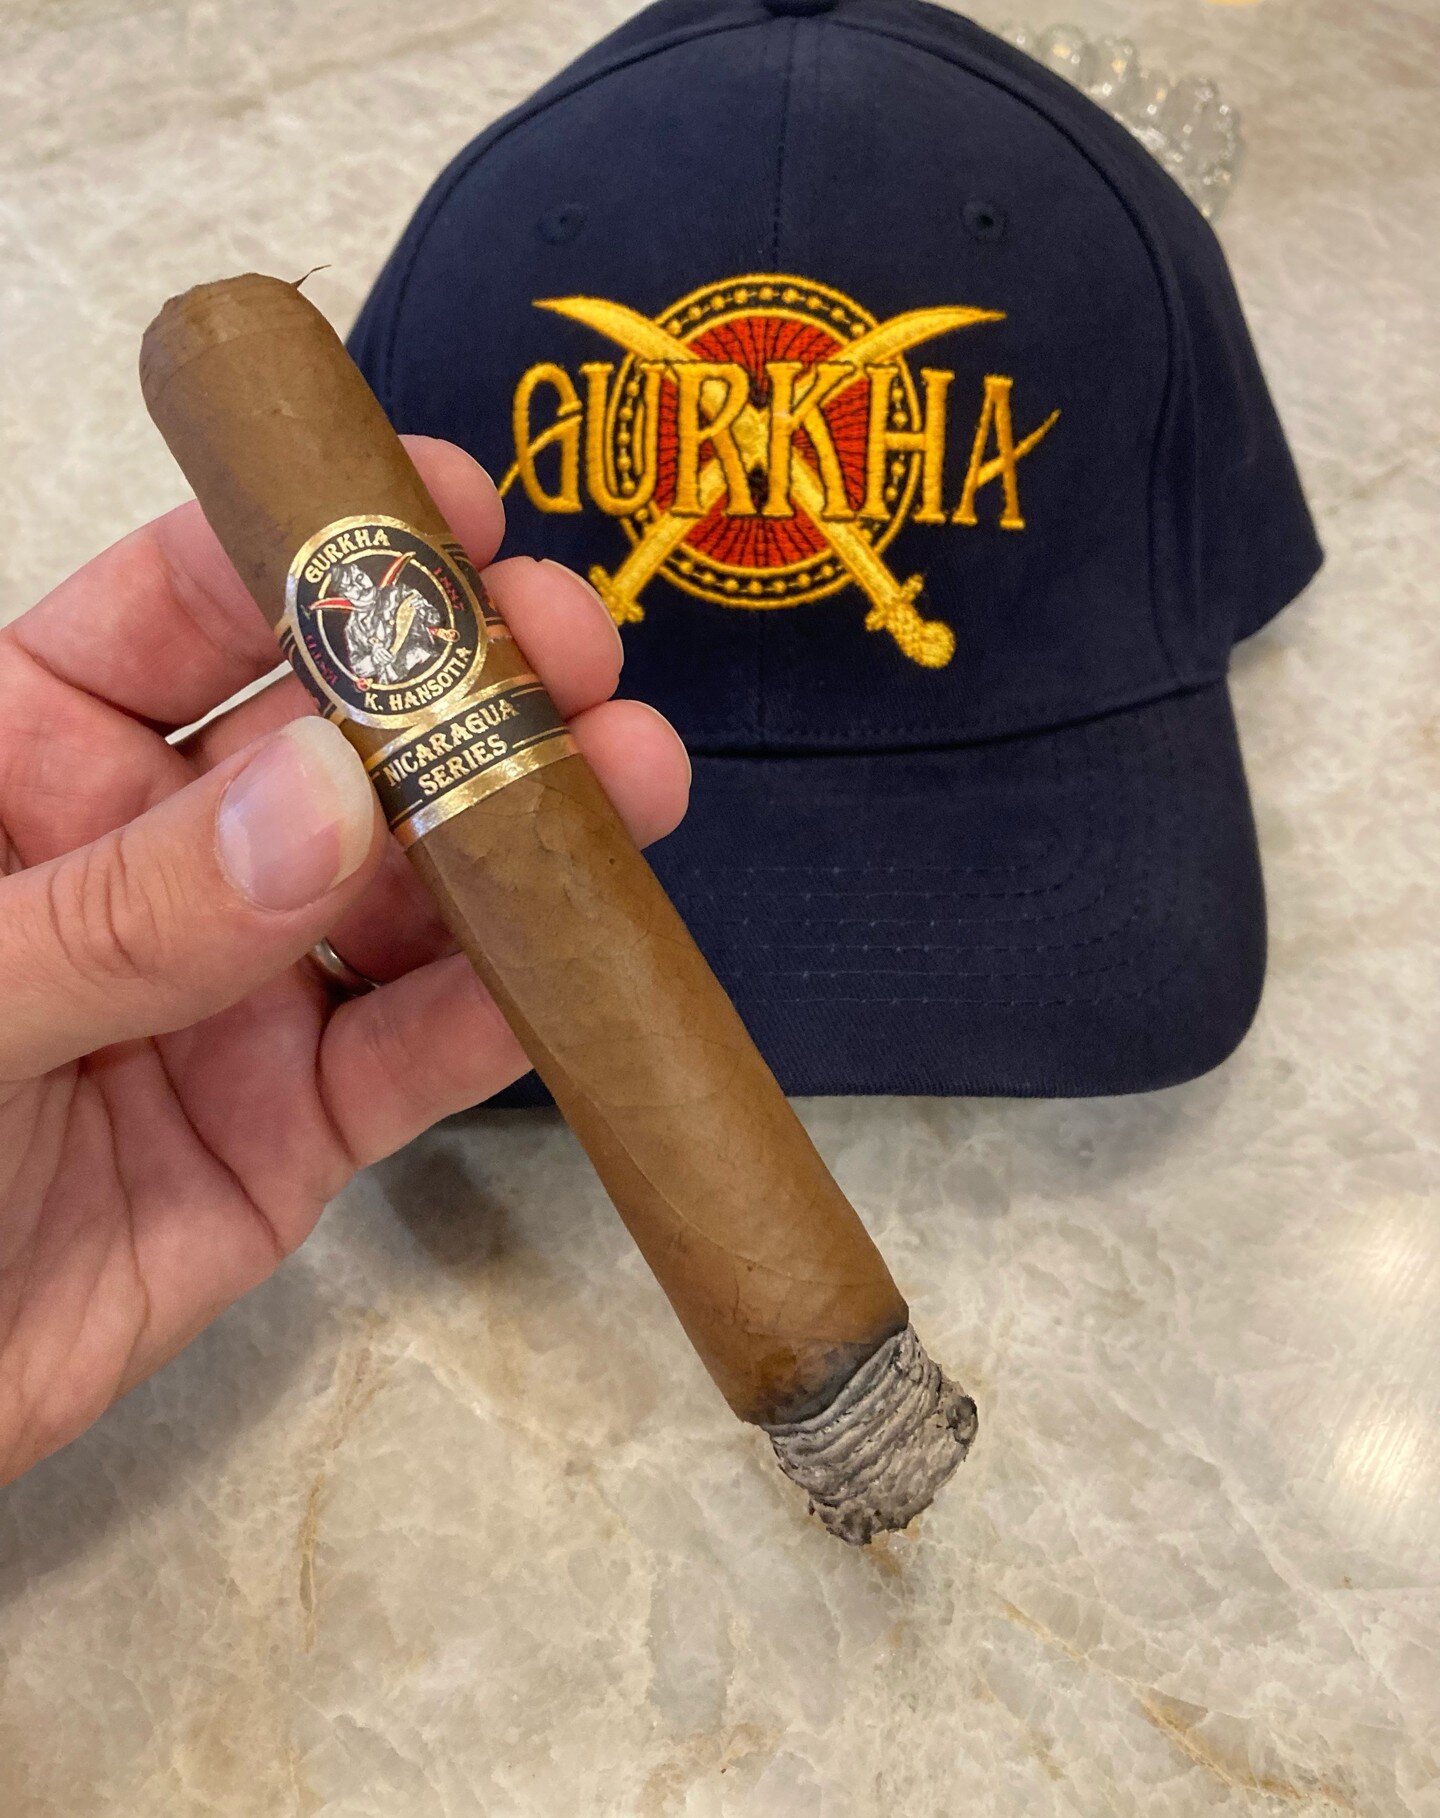 This week, our cigar of the week is Gurkha's Nicaraguan Series! Gurkha partnered with Aganorsa Leaf to create this all-Nicaraguan Cororjo blend. It's strong, but smooth - the perfect middle-ground for those used to Connecticut wrappers OR Maduro wrap